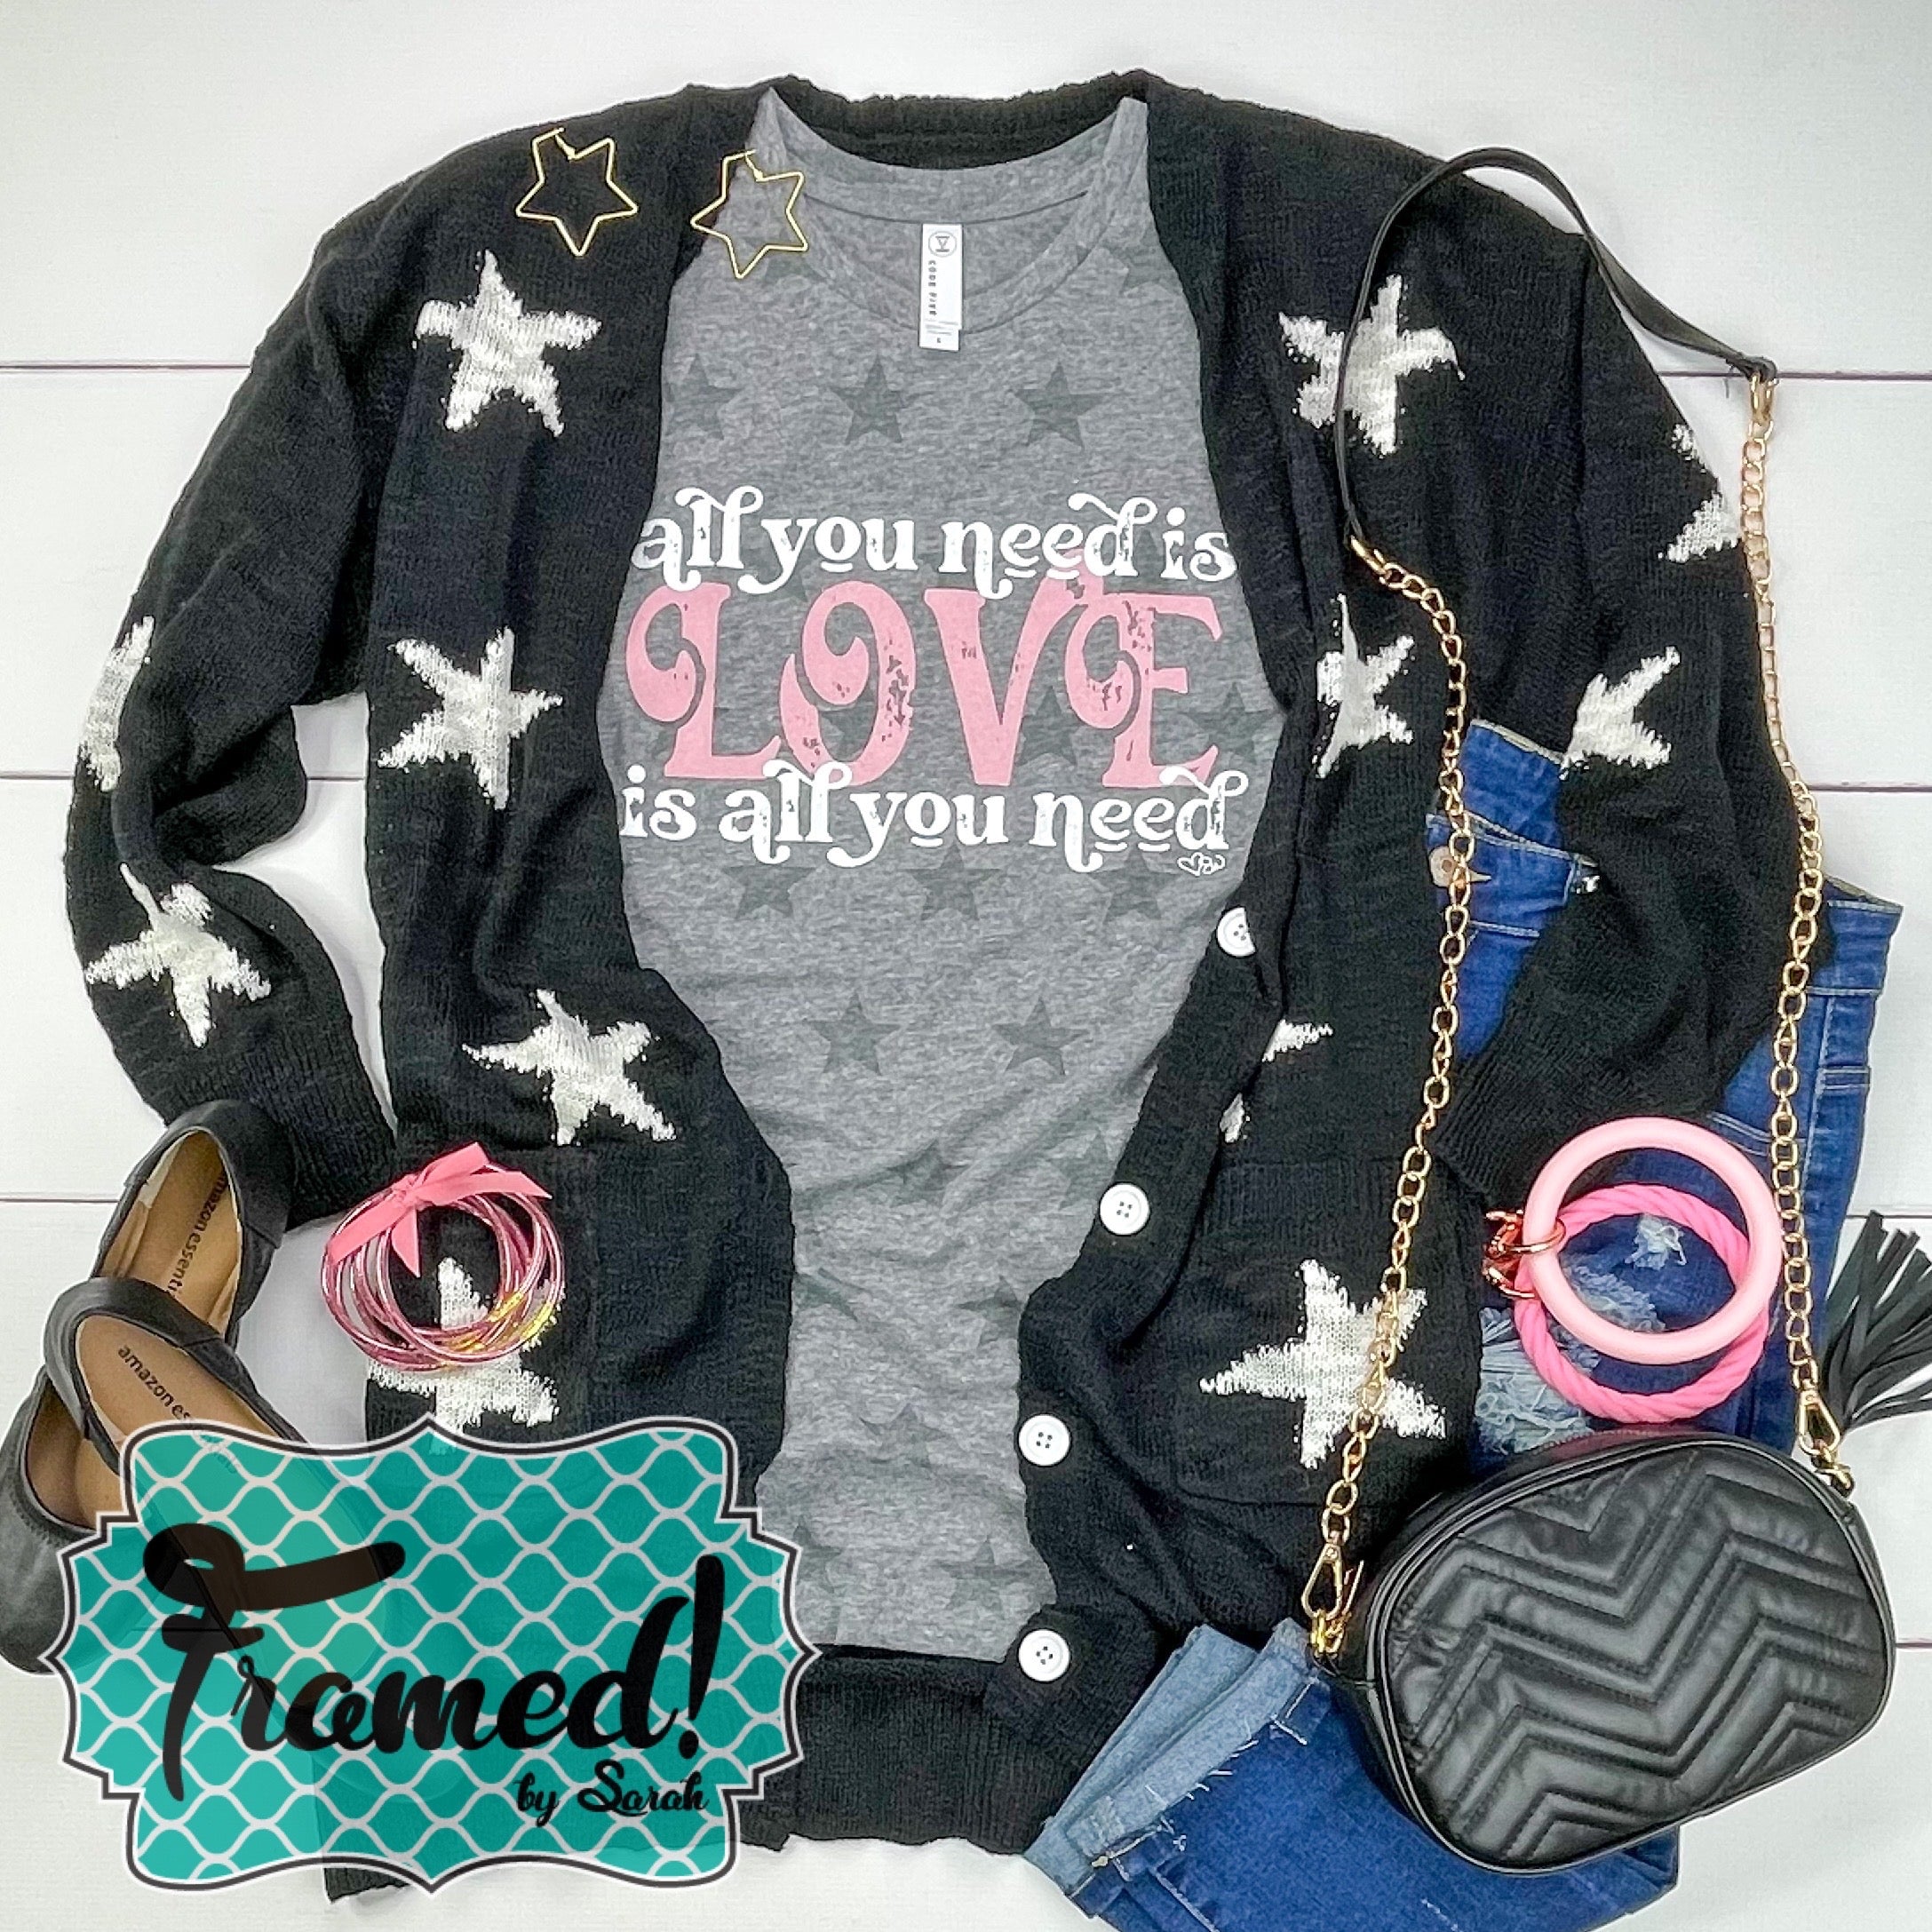 All You Need Is Love Star Tee (Sm, Md & XL only)